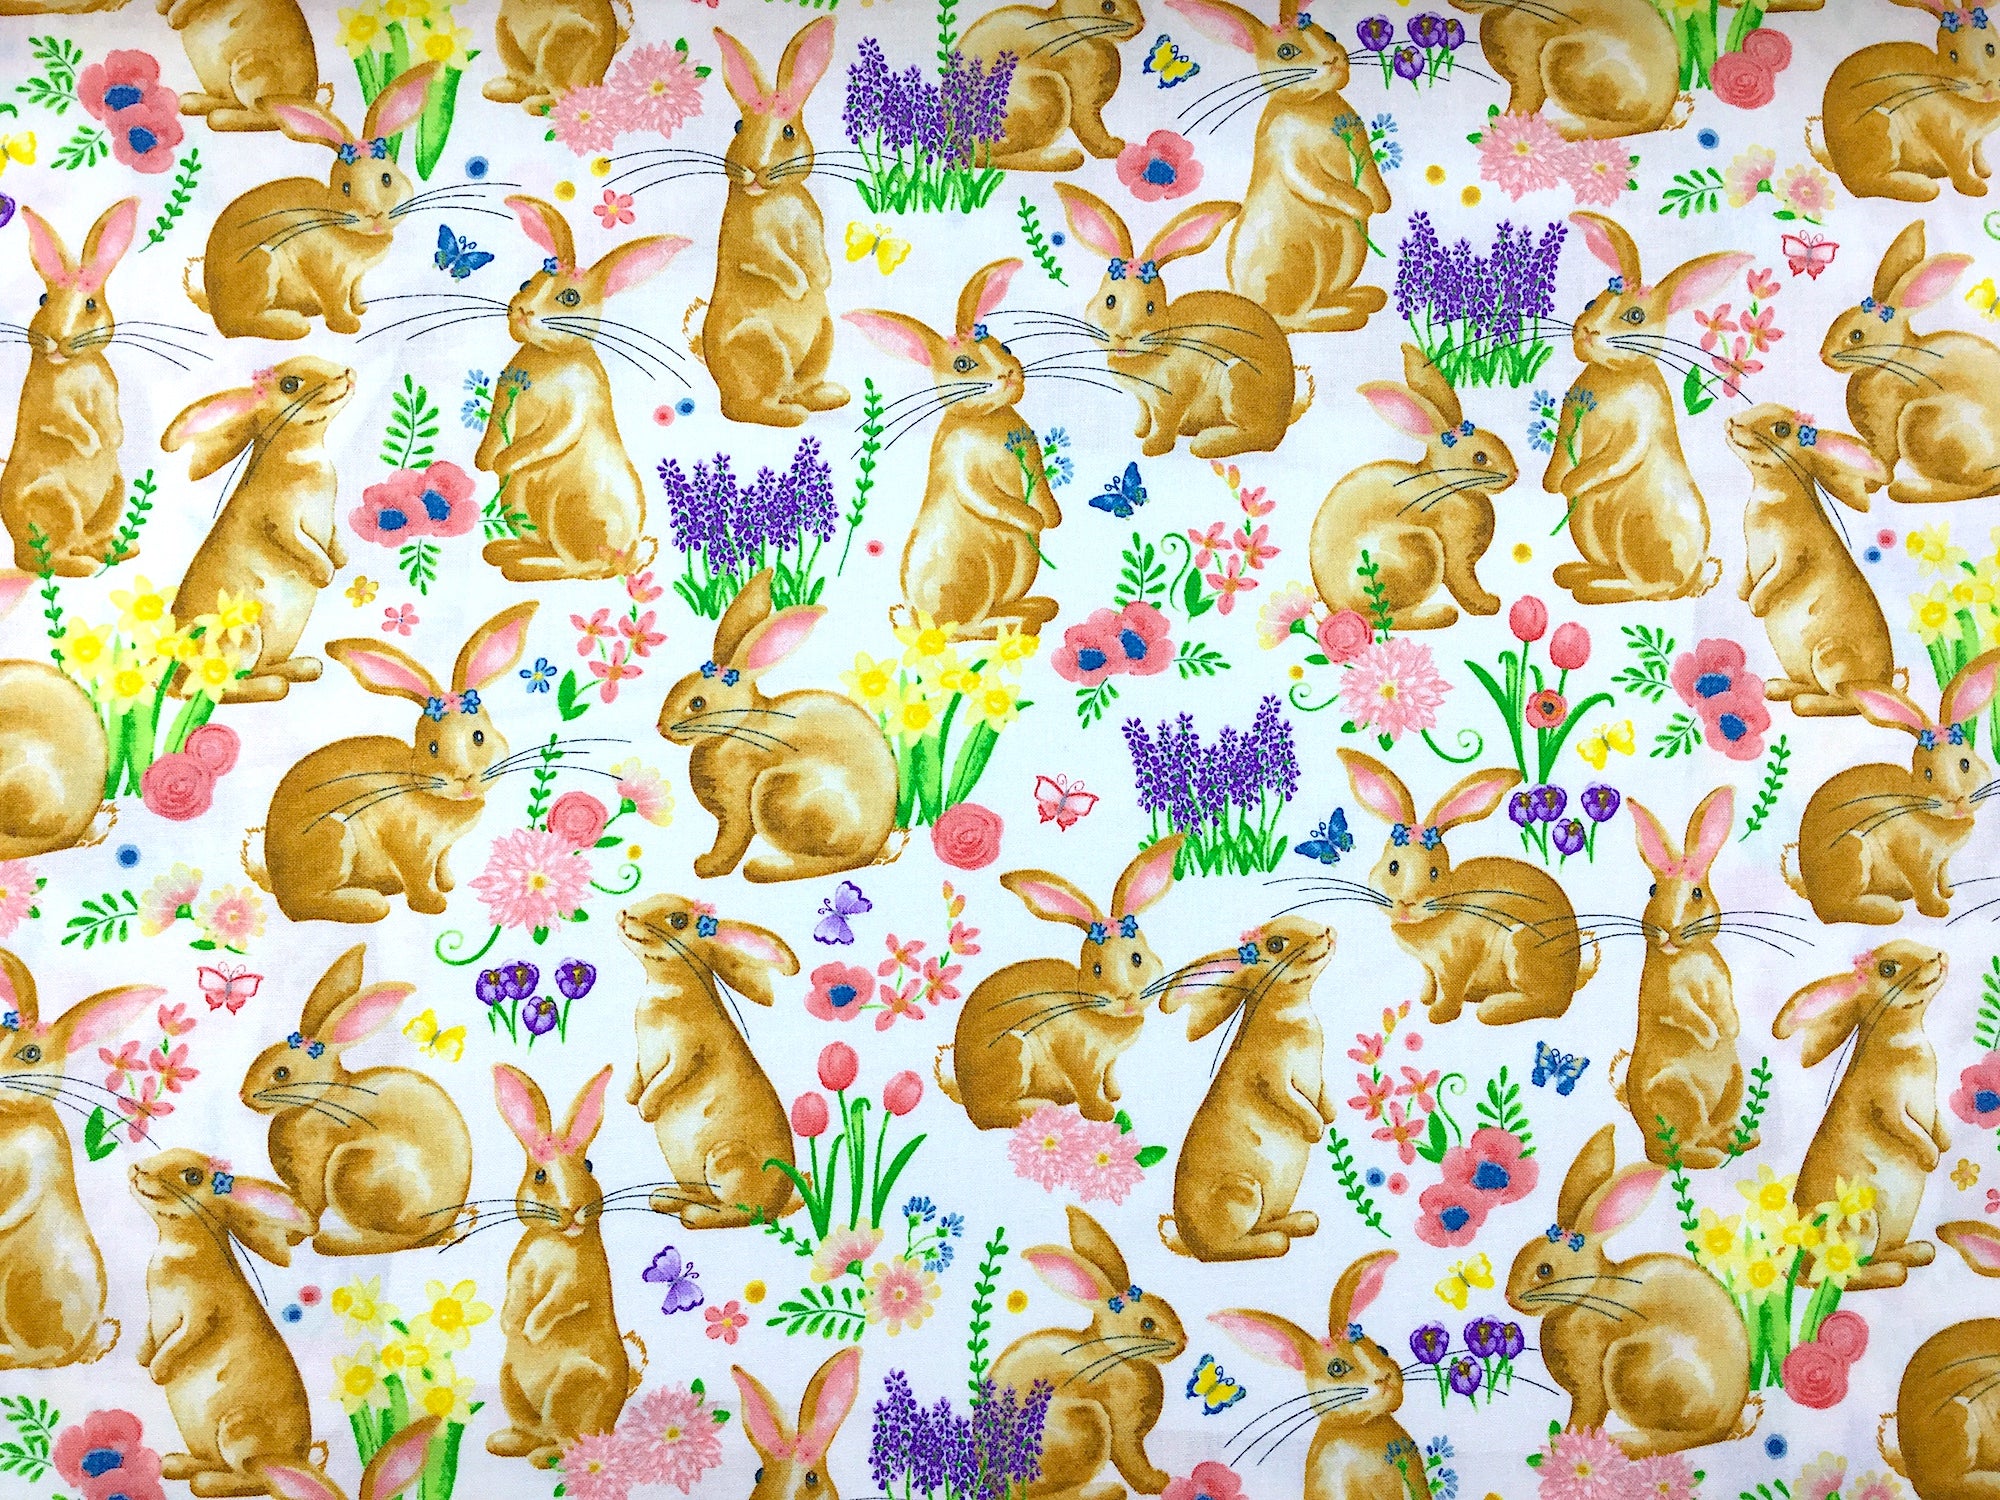 Cotton fabric covered with bunnies, and flowers.